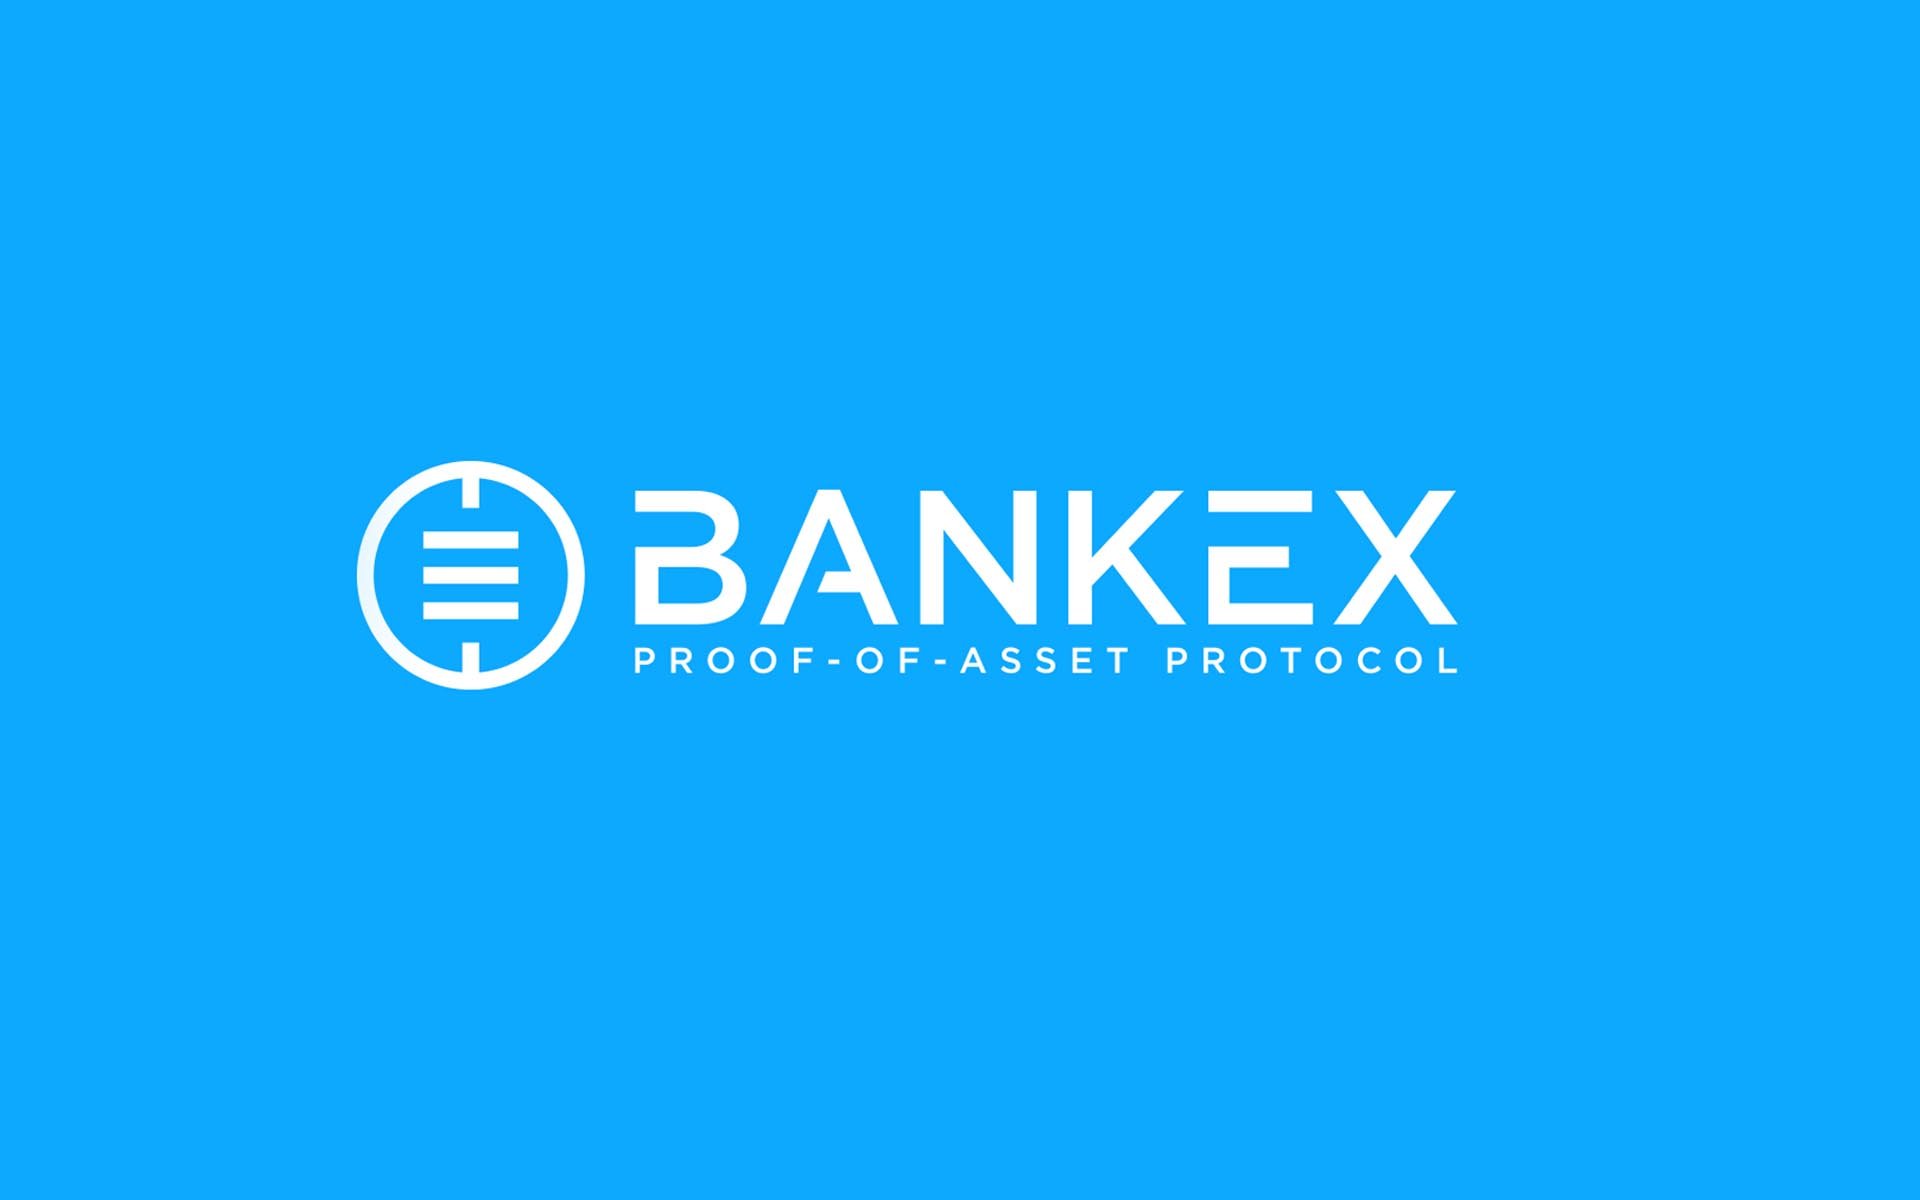 Proof-of-Asset Protocol by BANKEX – a New Era in the History of Banking Services